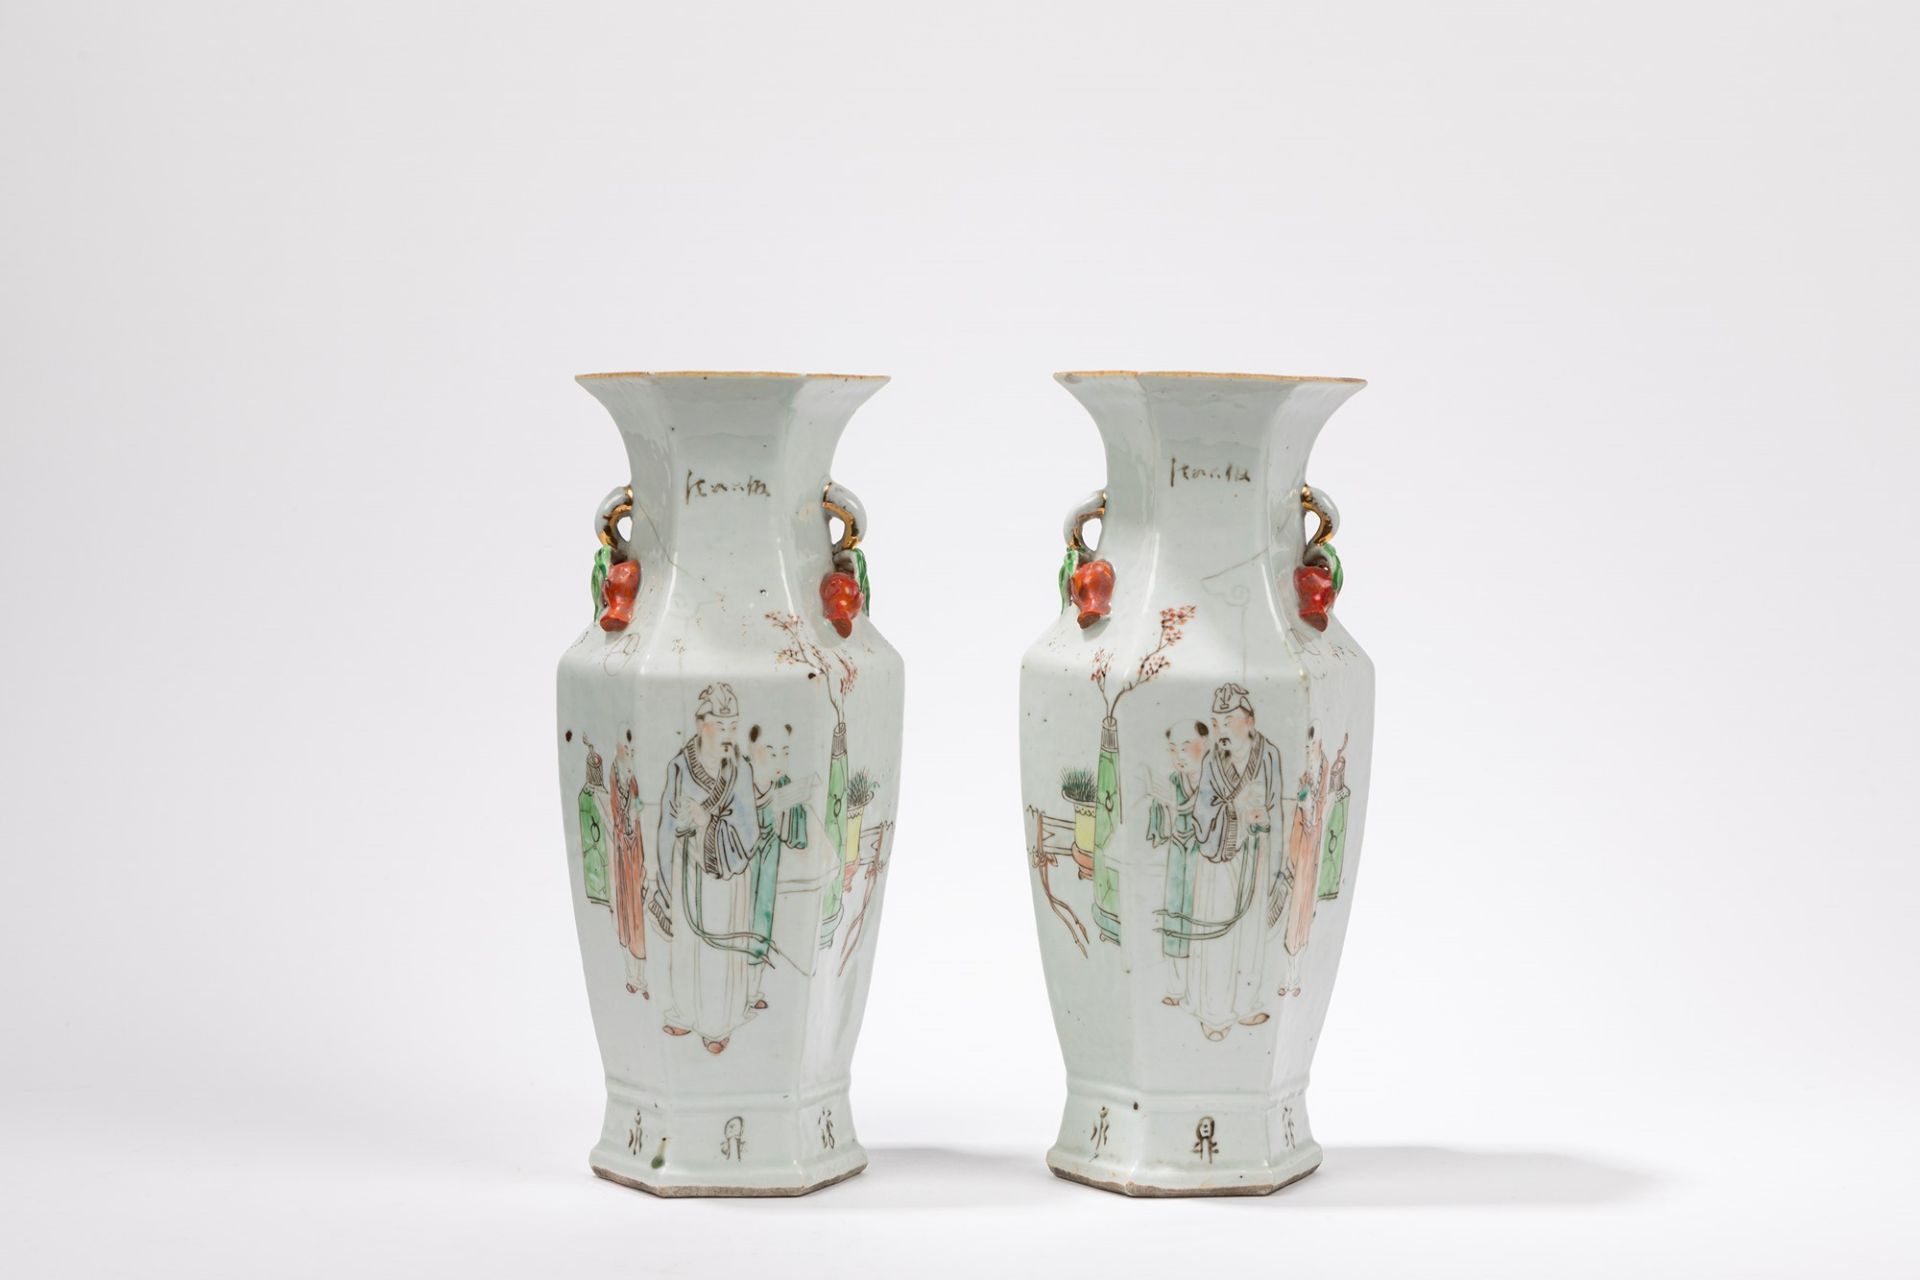 A PAIR OF HEXAGONAL BALUSTER SHAPED QIANJIANGCAI VASES, China, late 19th / early 20th century